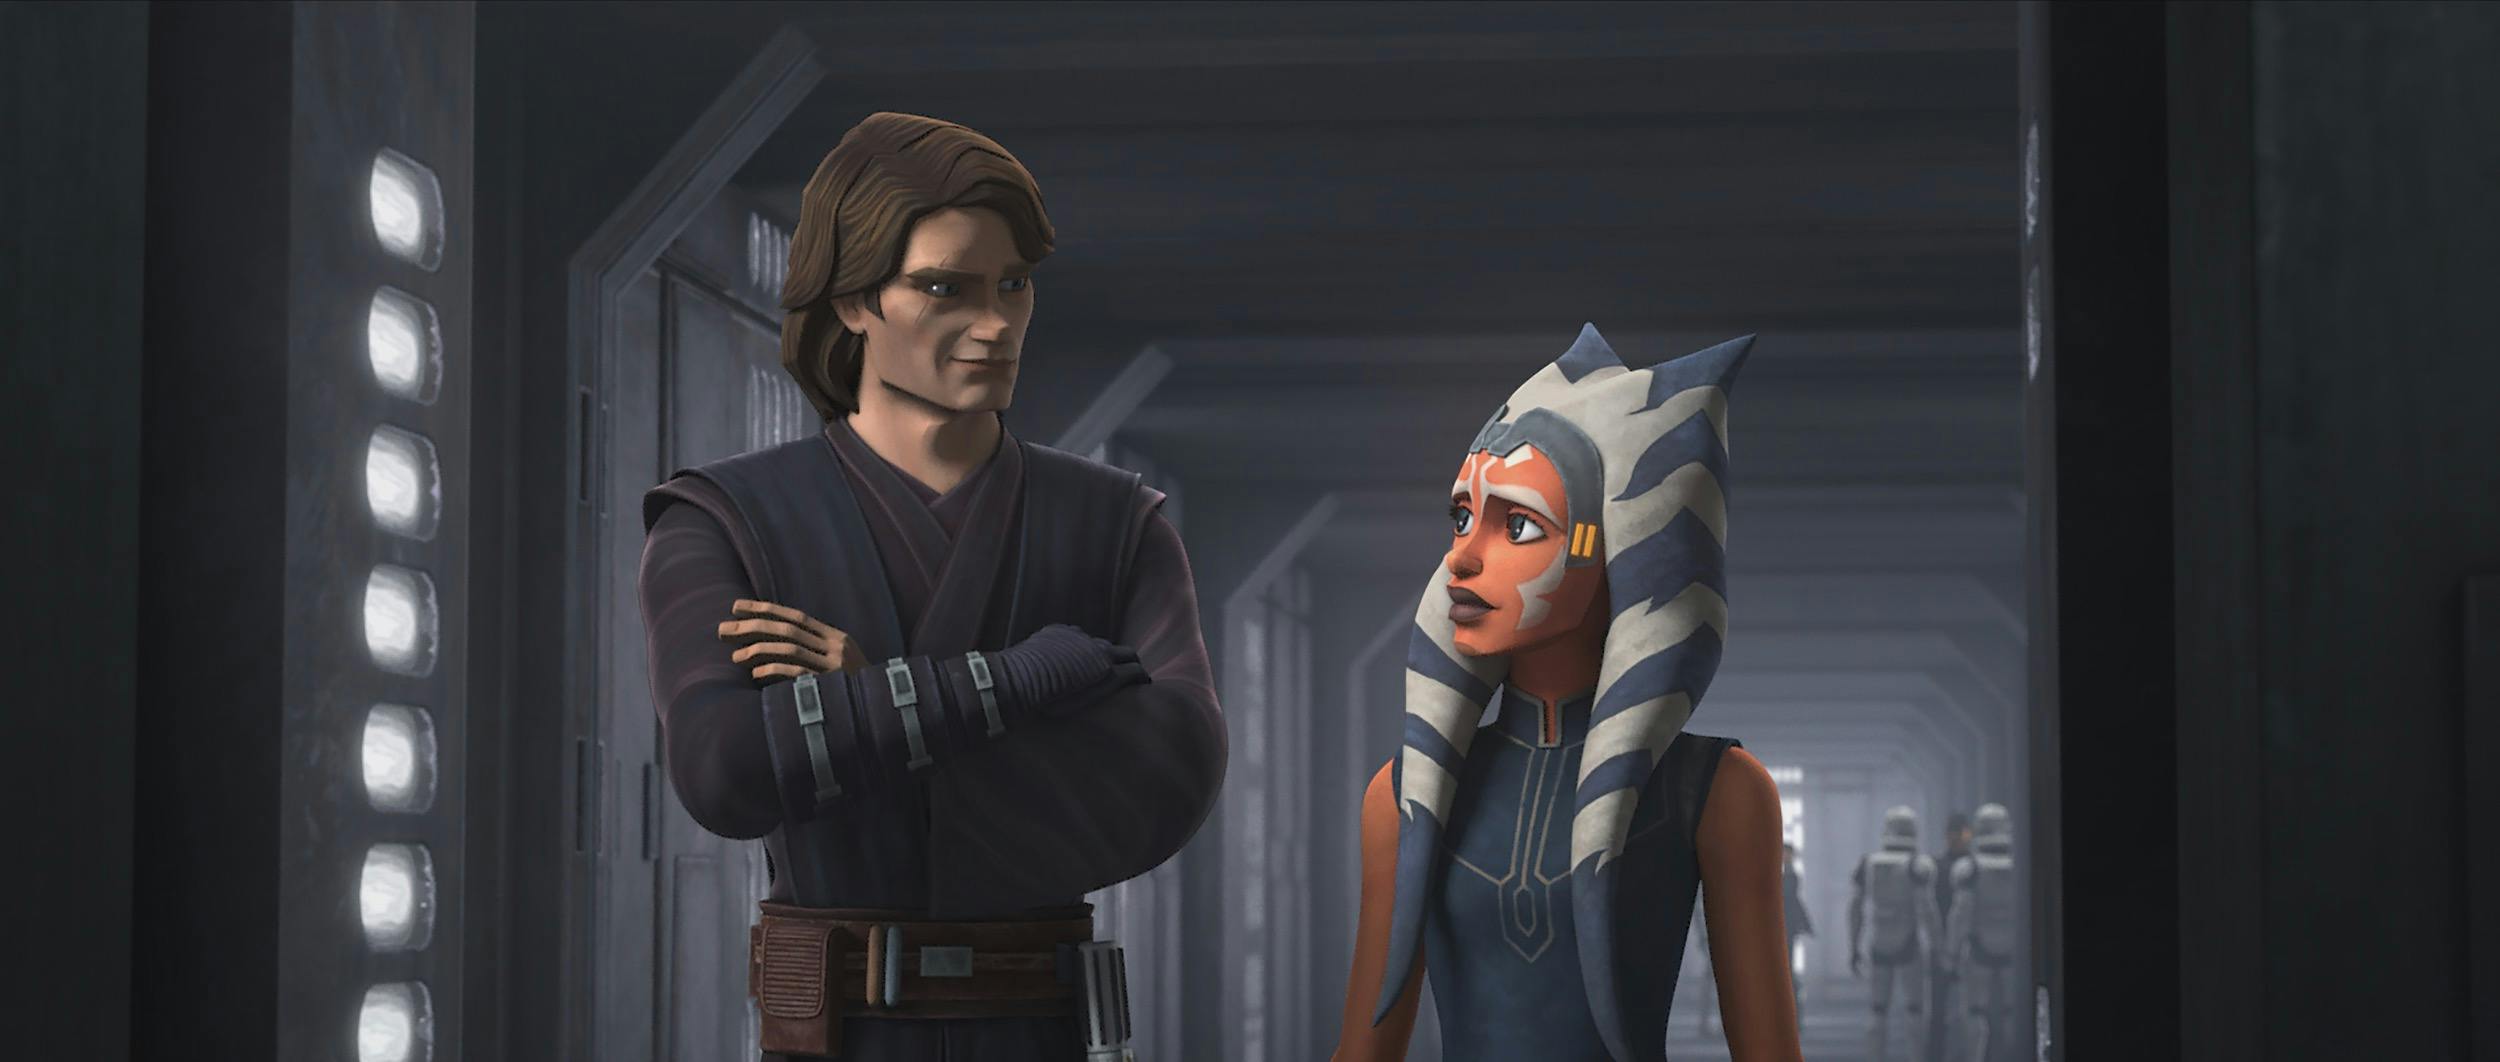 clone wars finale review